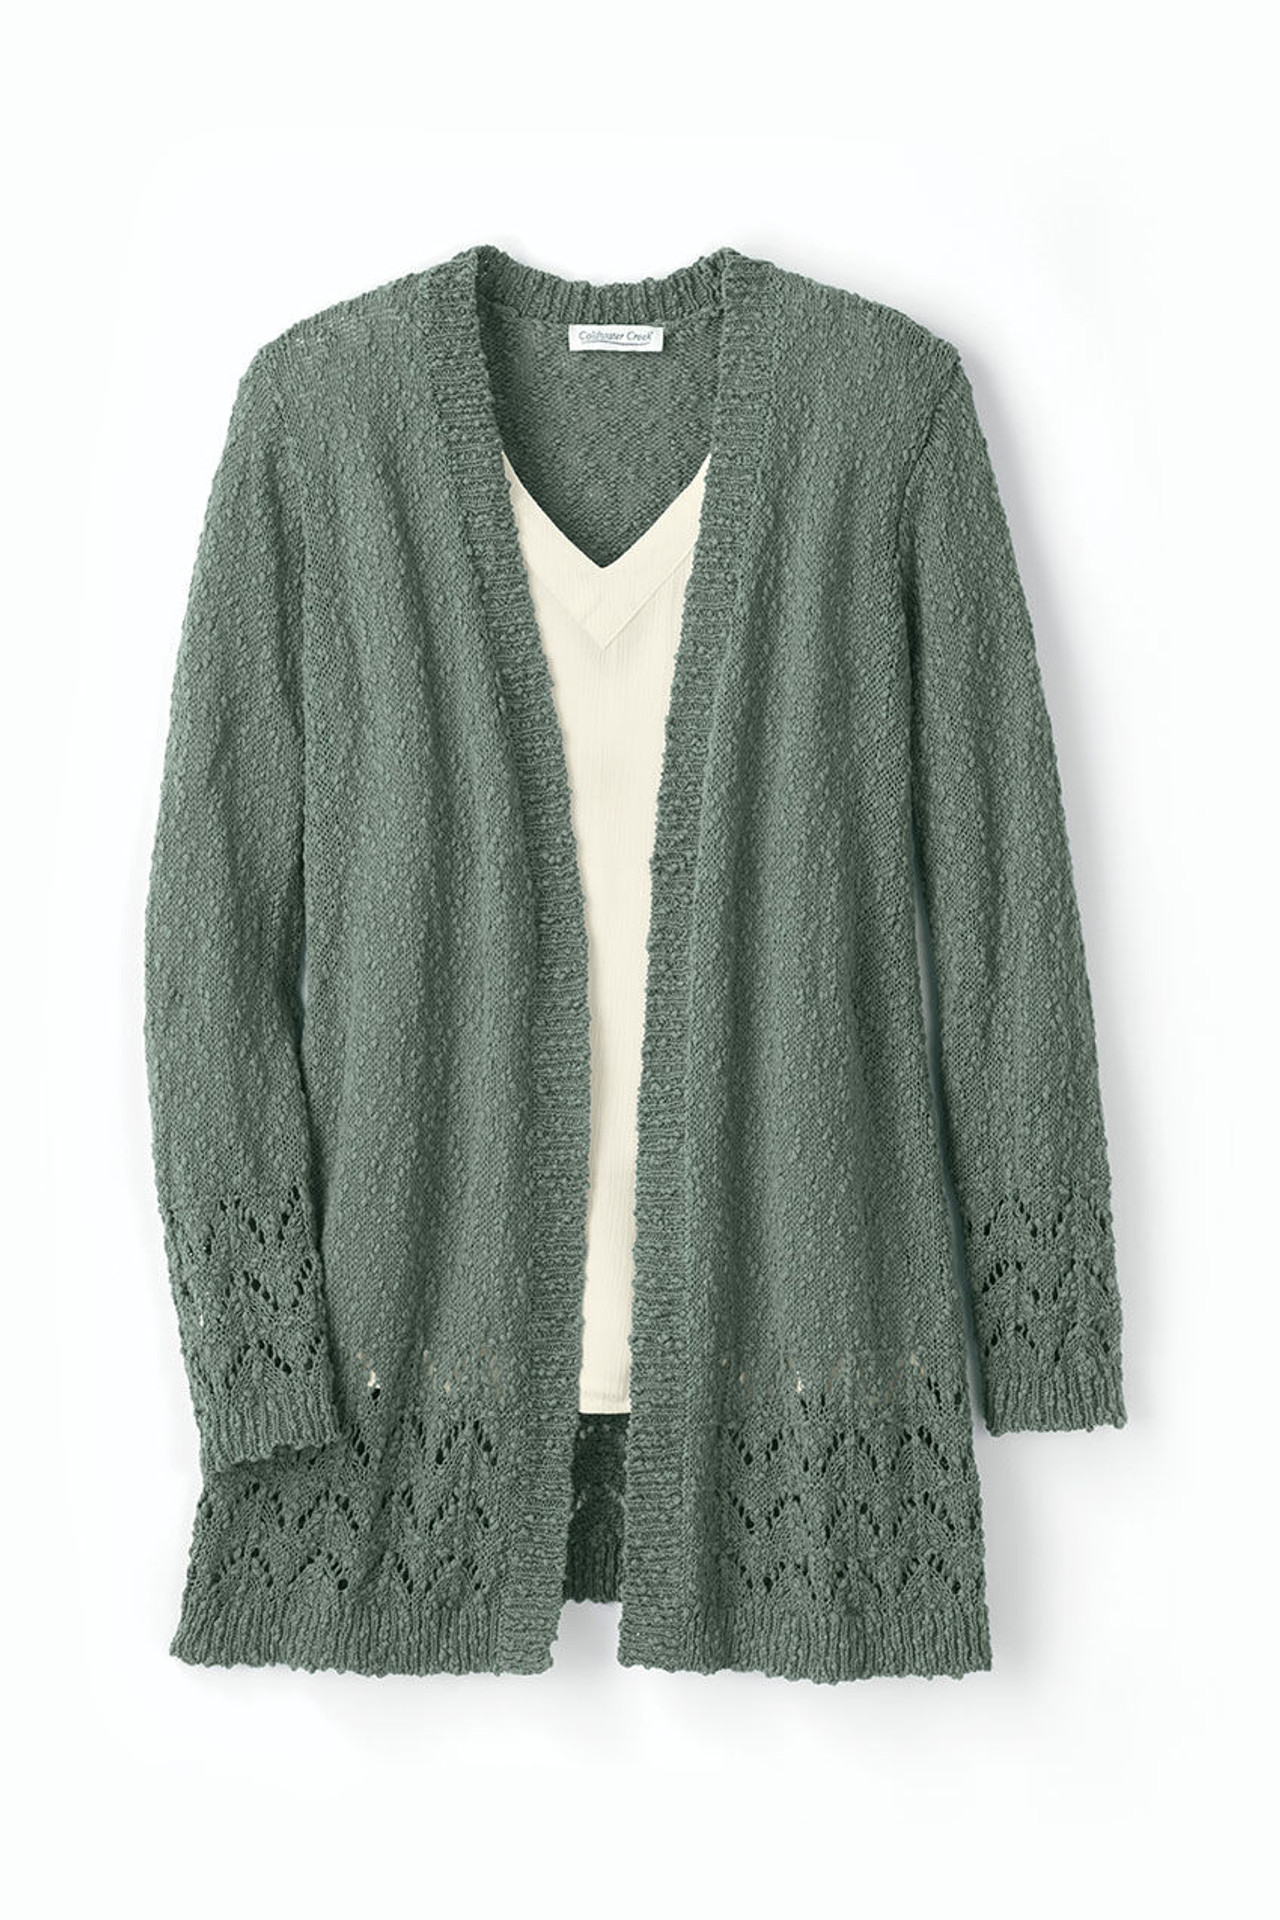 Pointelle Intrigue Cardigan